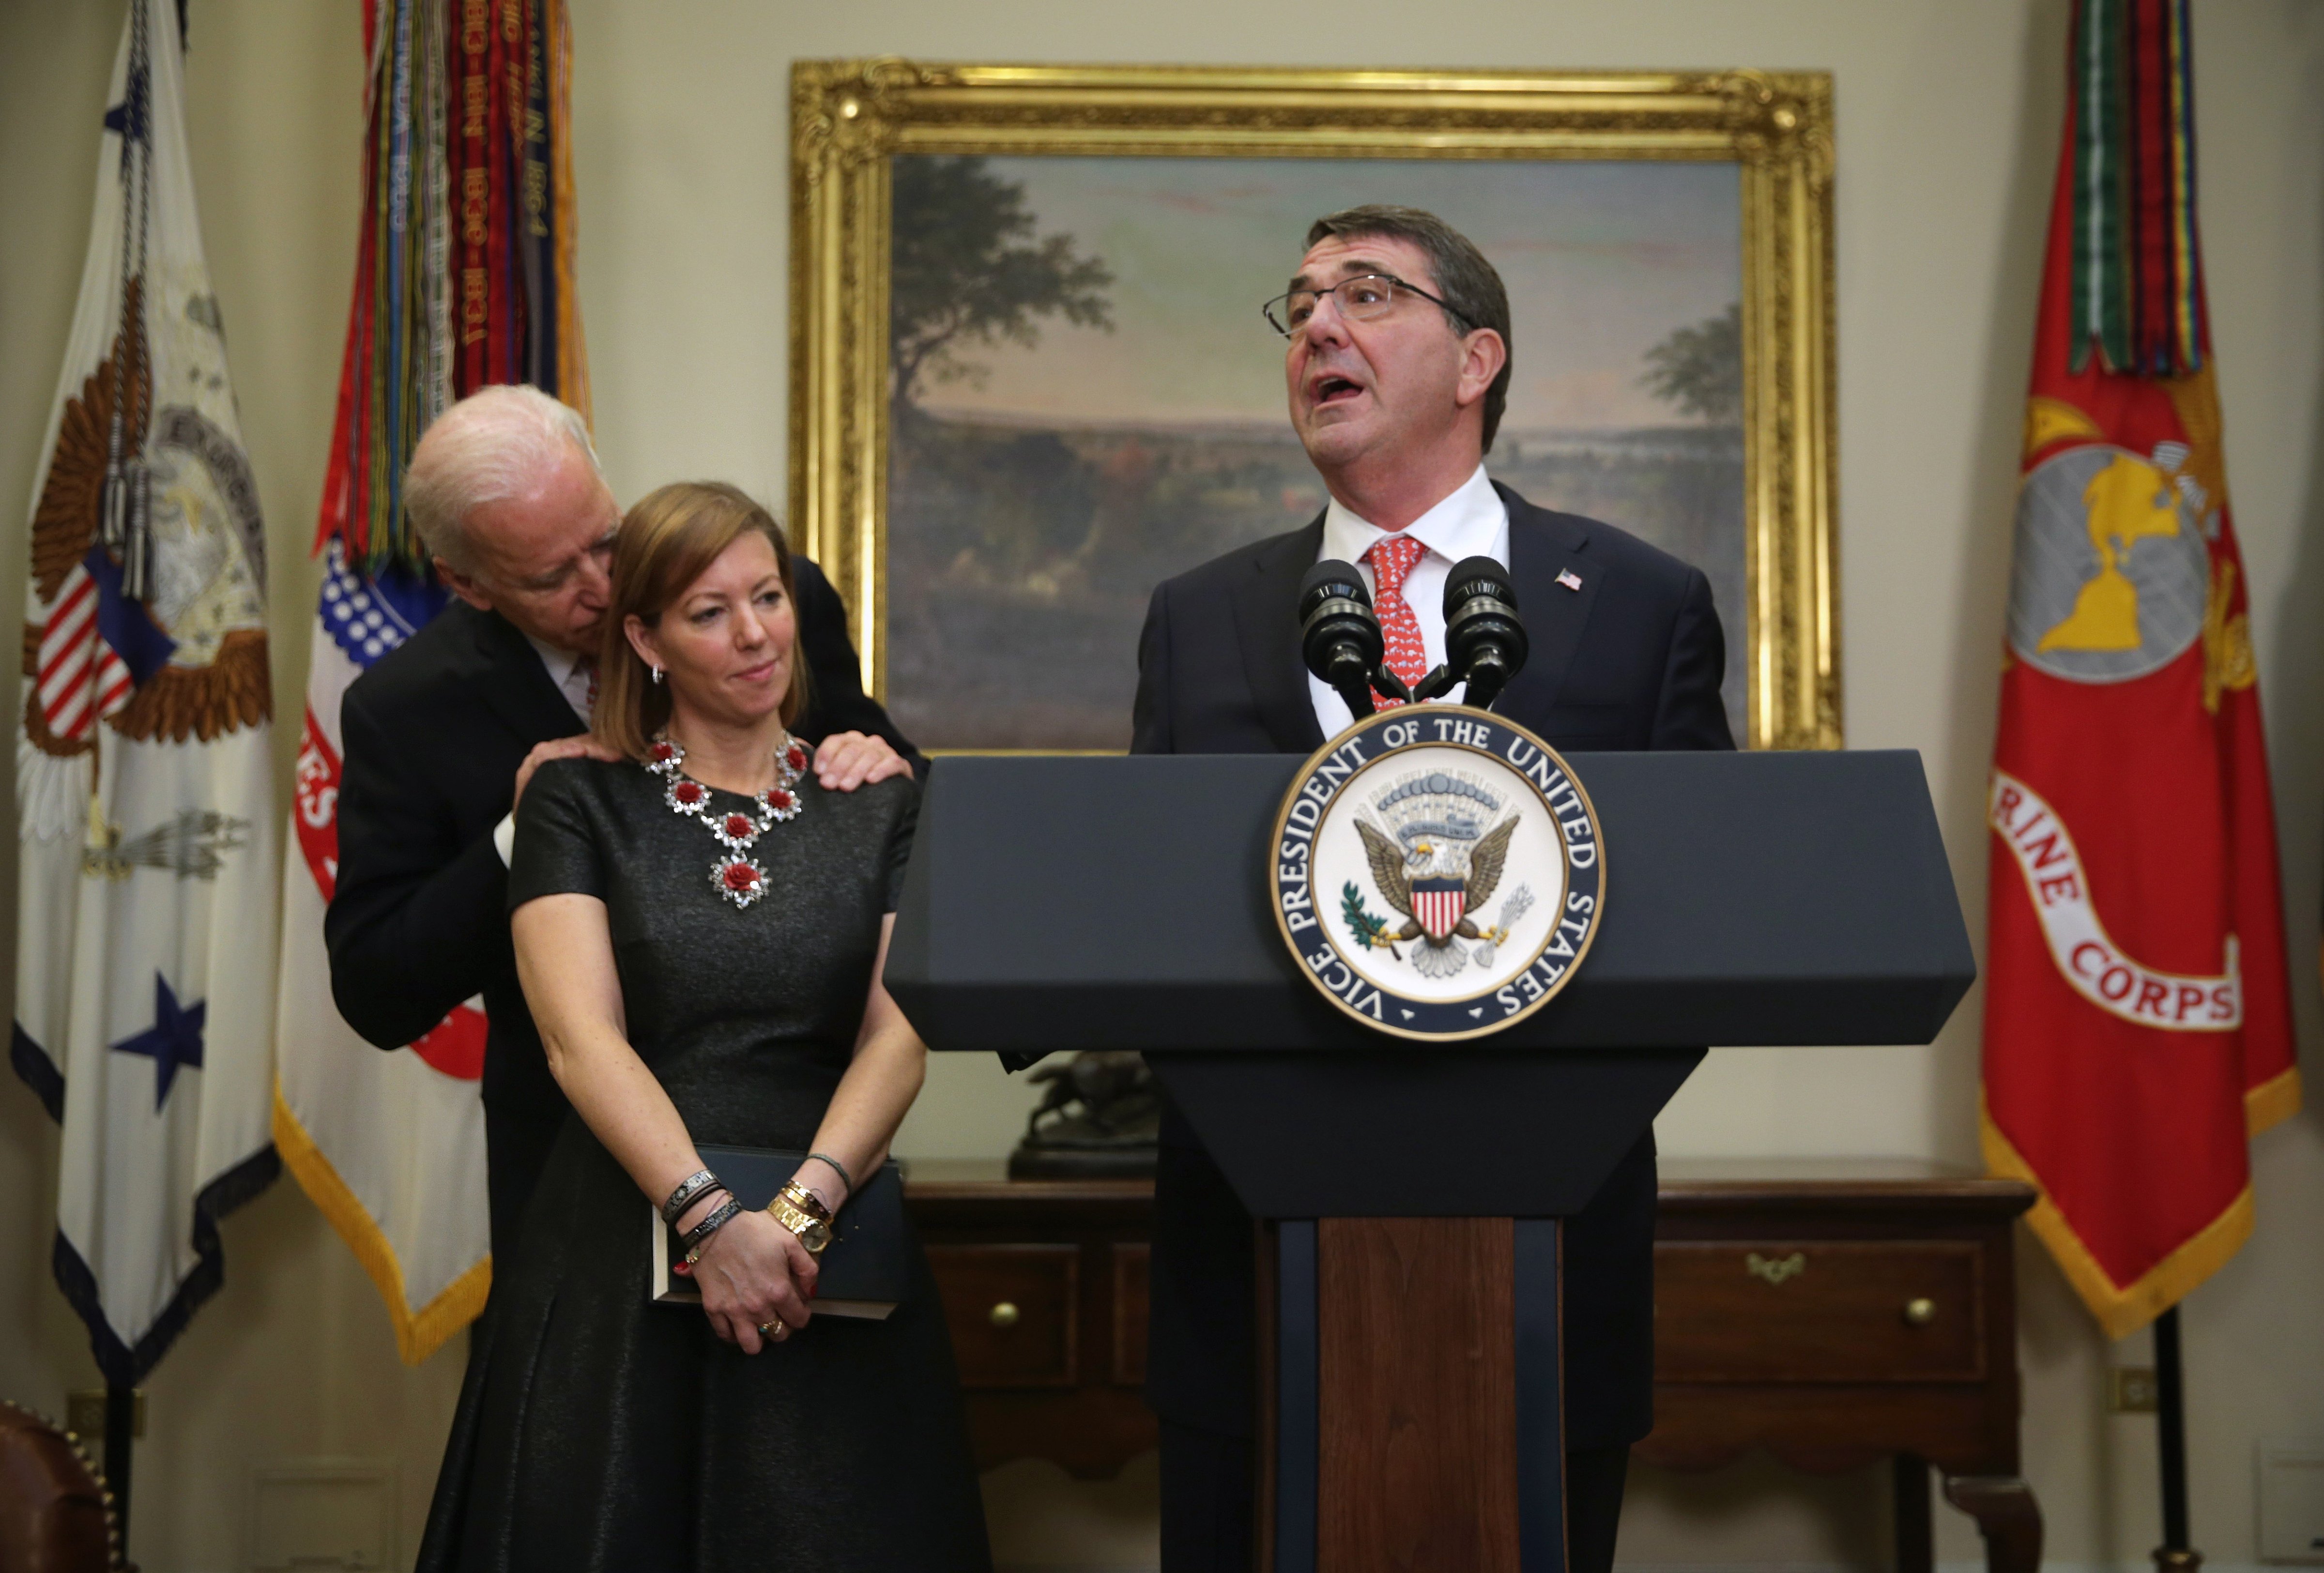 Secretary of Defense Ashton Carter delivers remarks after being sworn in during a ceremony in the White House in Washington. D.C. while his wife Stephanie Carter and Vice President Joseph Biden observe on Feb. 17, 2015. (Alex Wong—Getty Images)